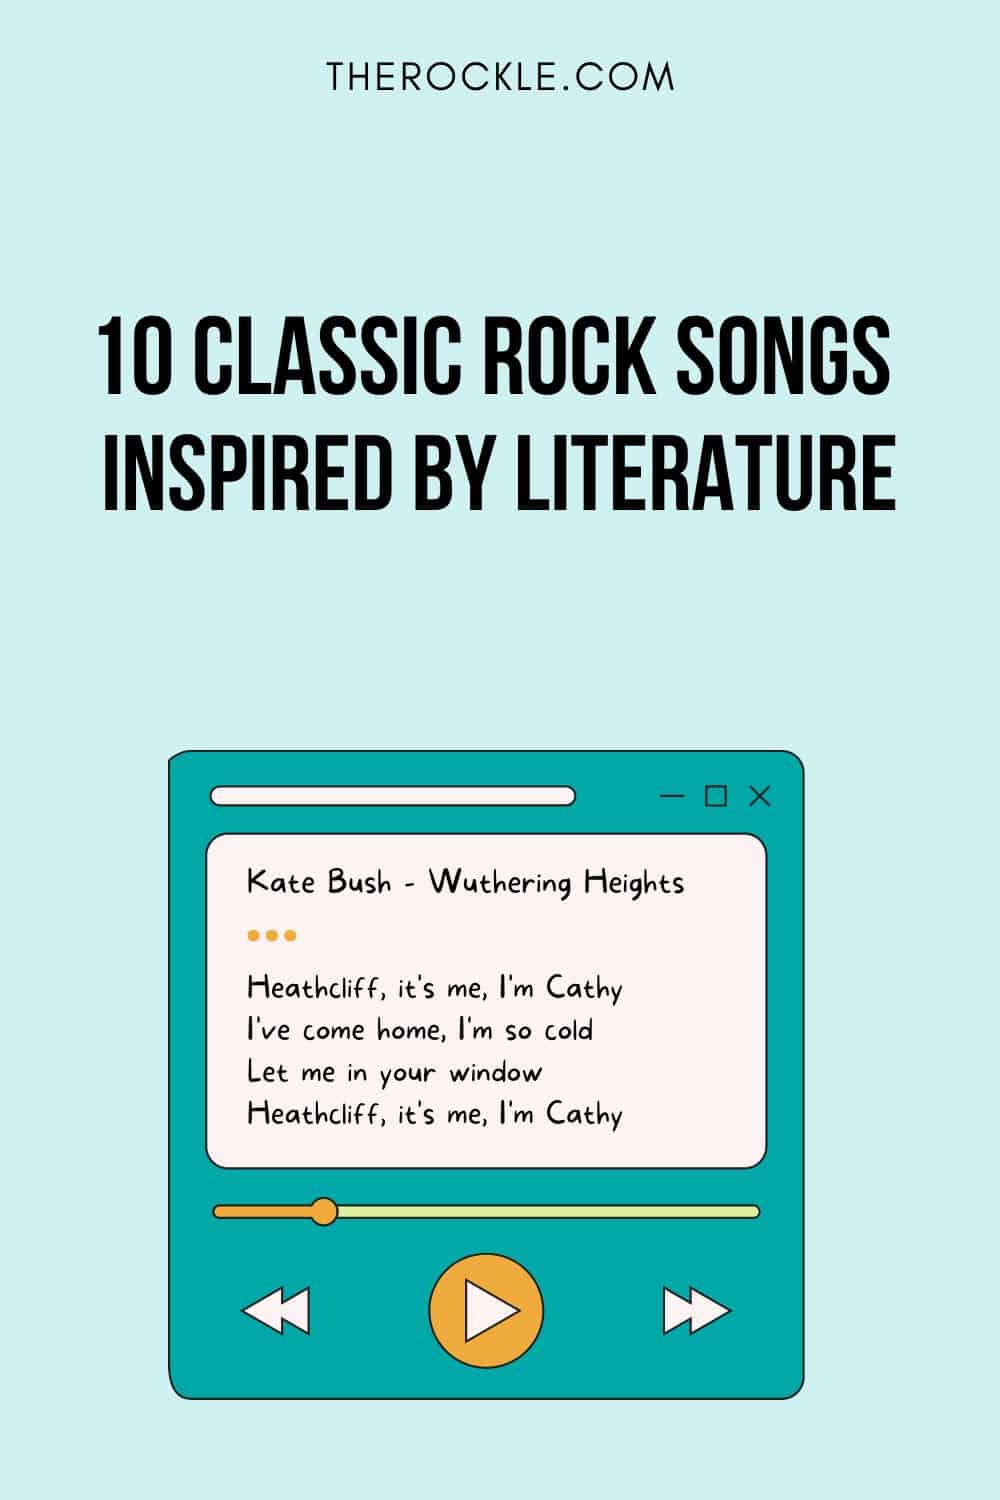 10 Classic Rock Songs Inspired by Literature Pinterest